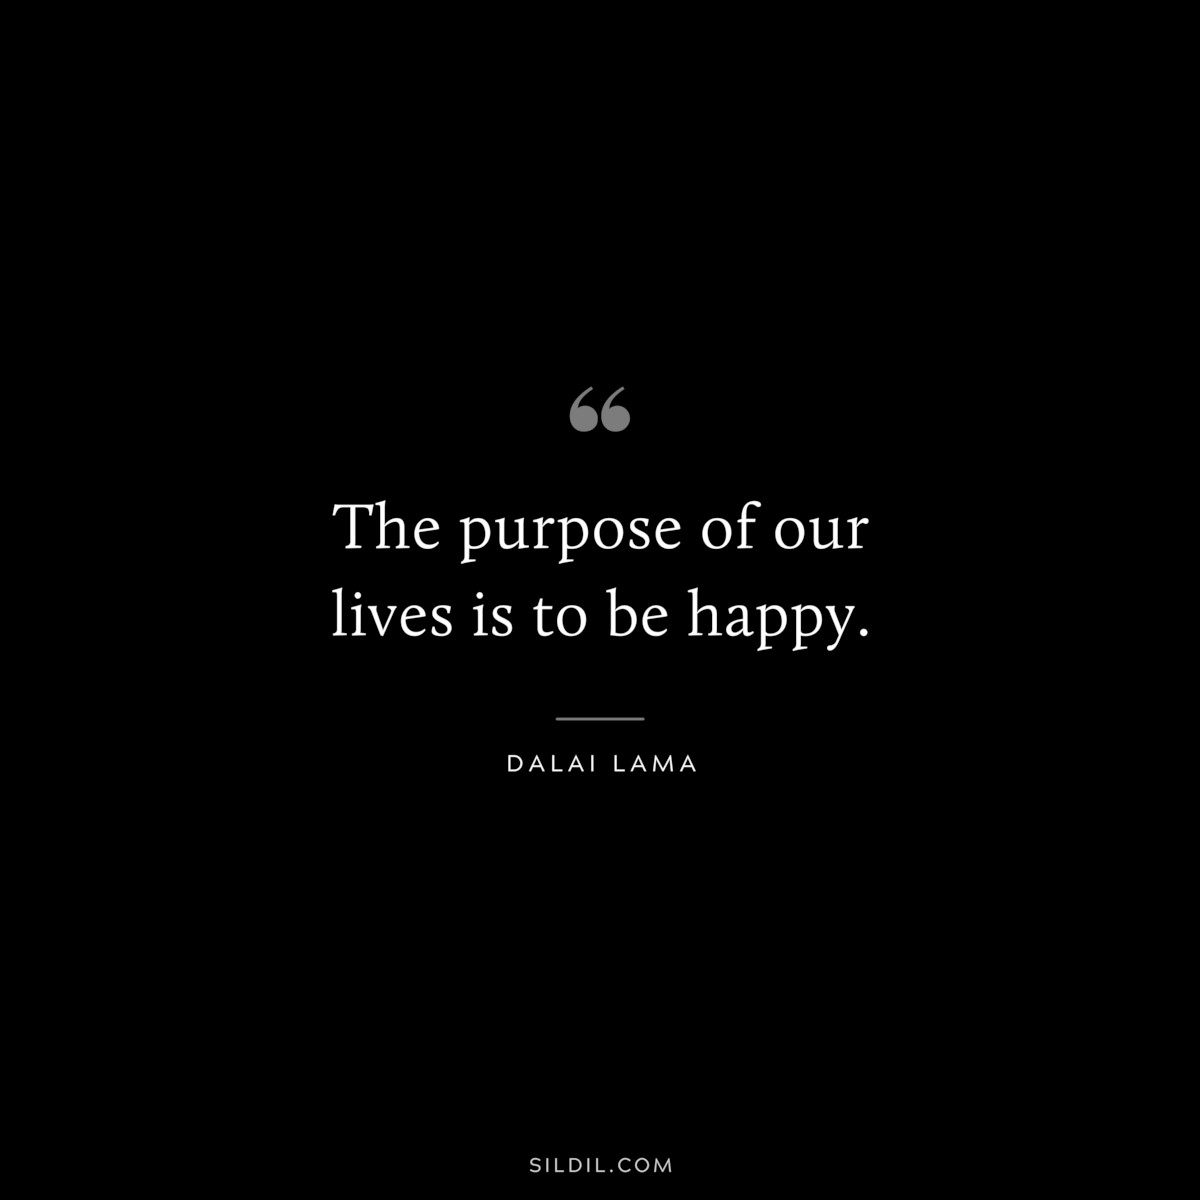 The purpose of our lives is to be happy. ― Dalai Lama